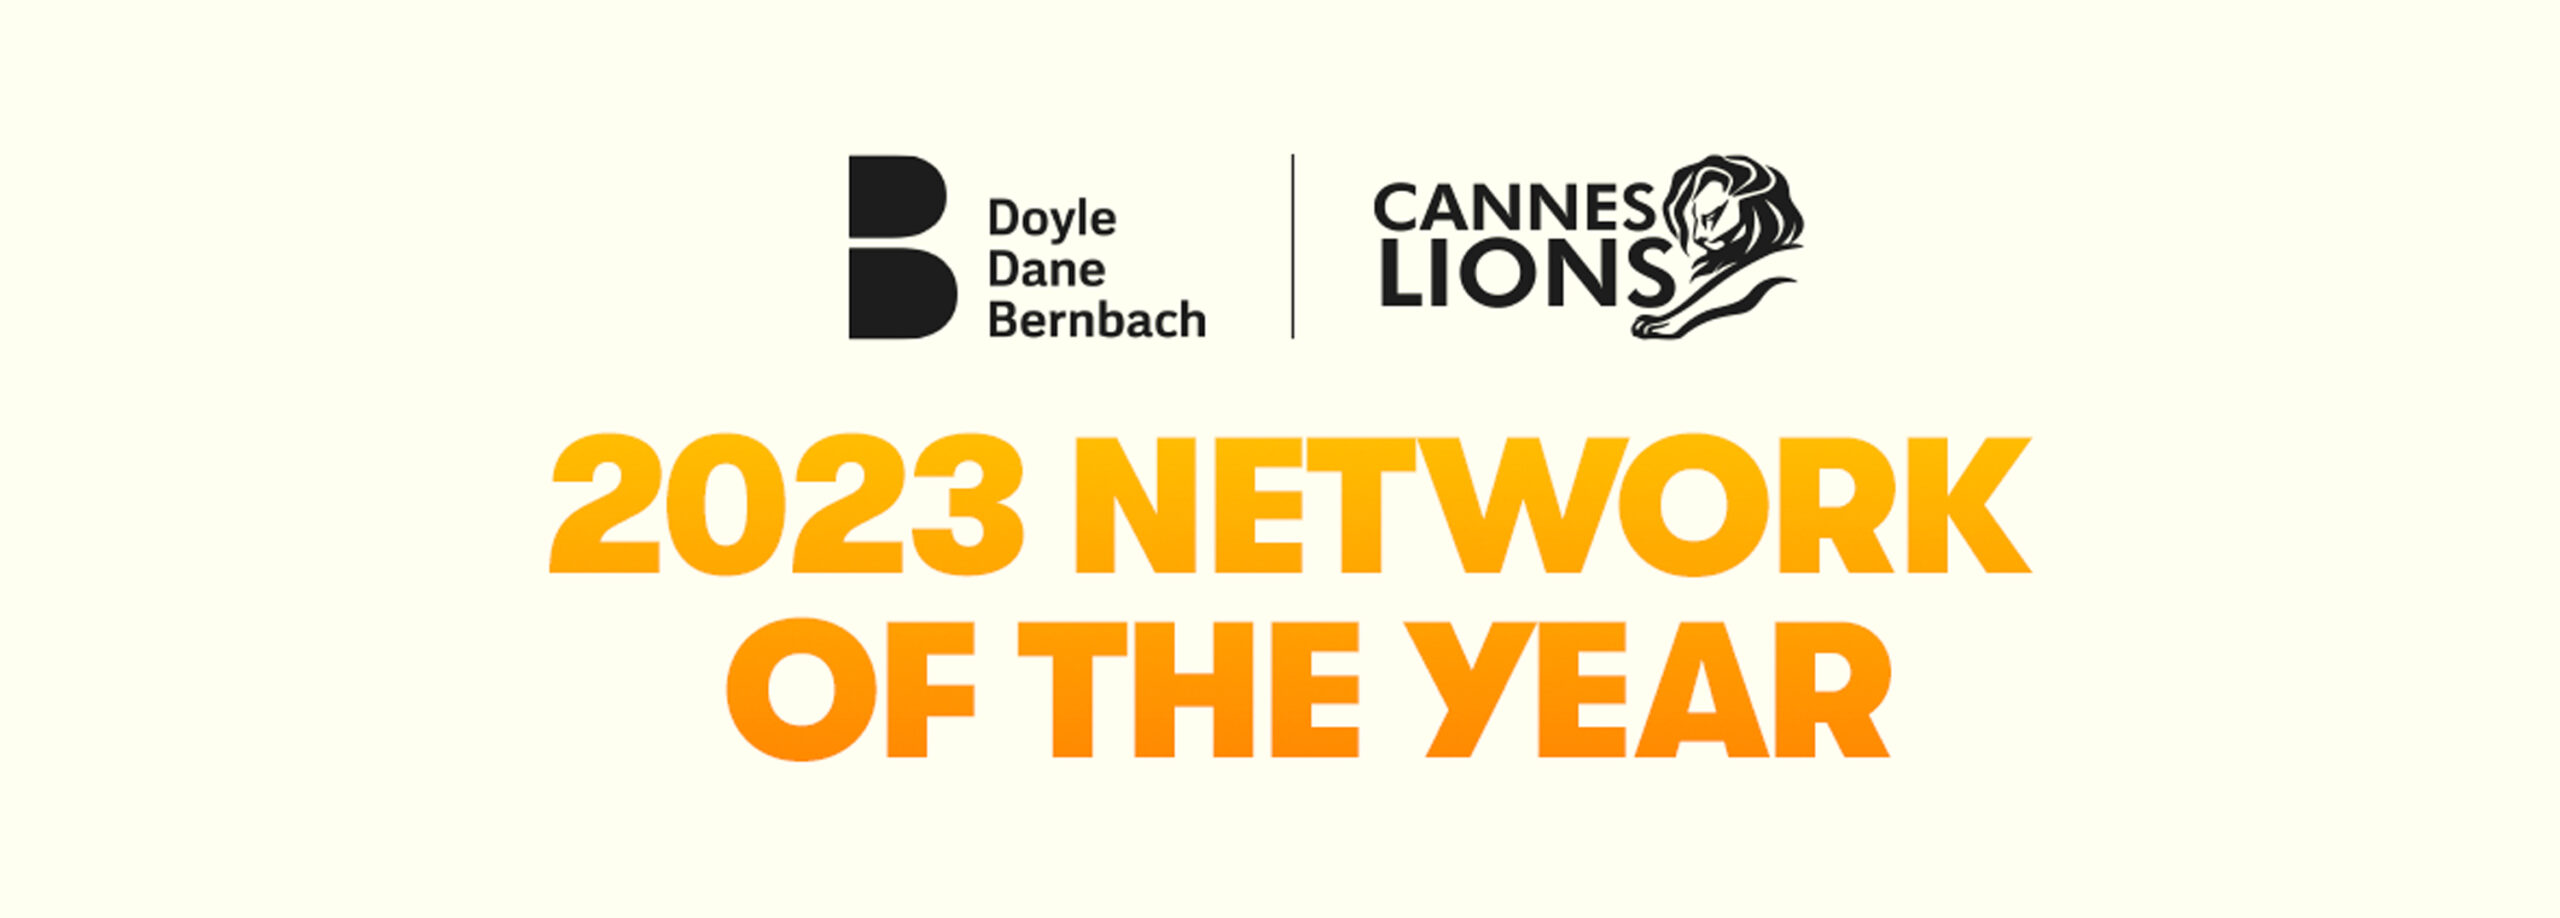 CANNES 2023 NETWORK OF THE YEAR